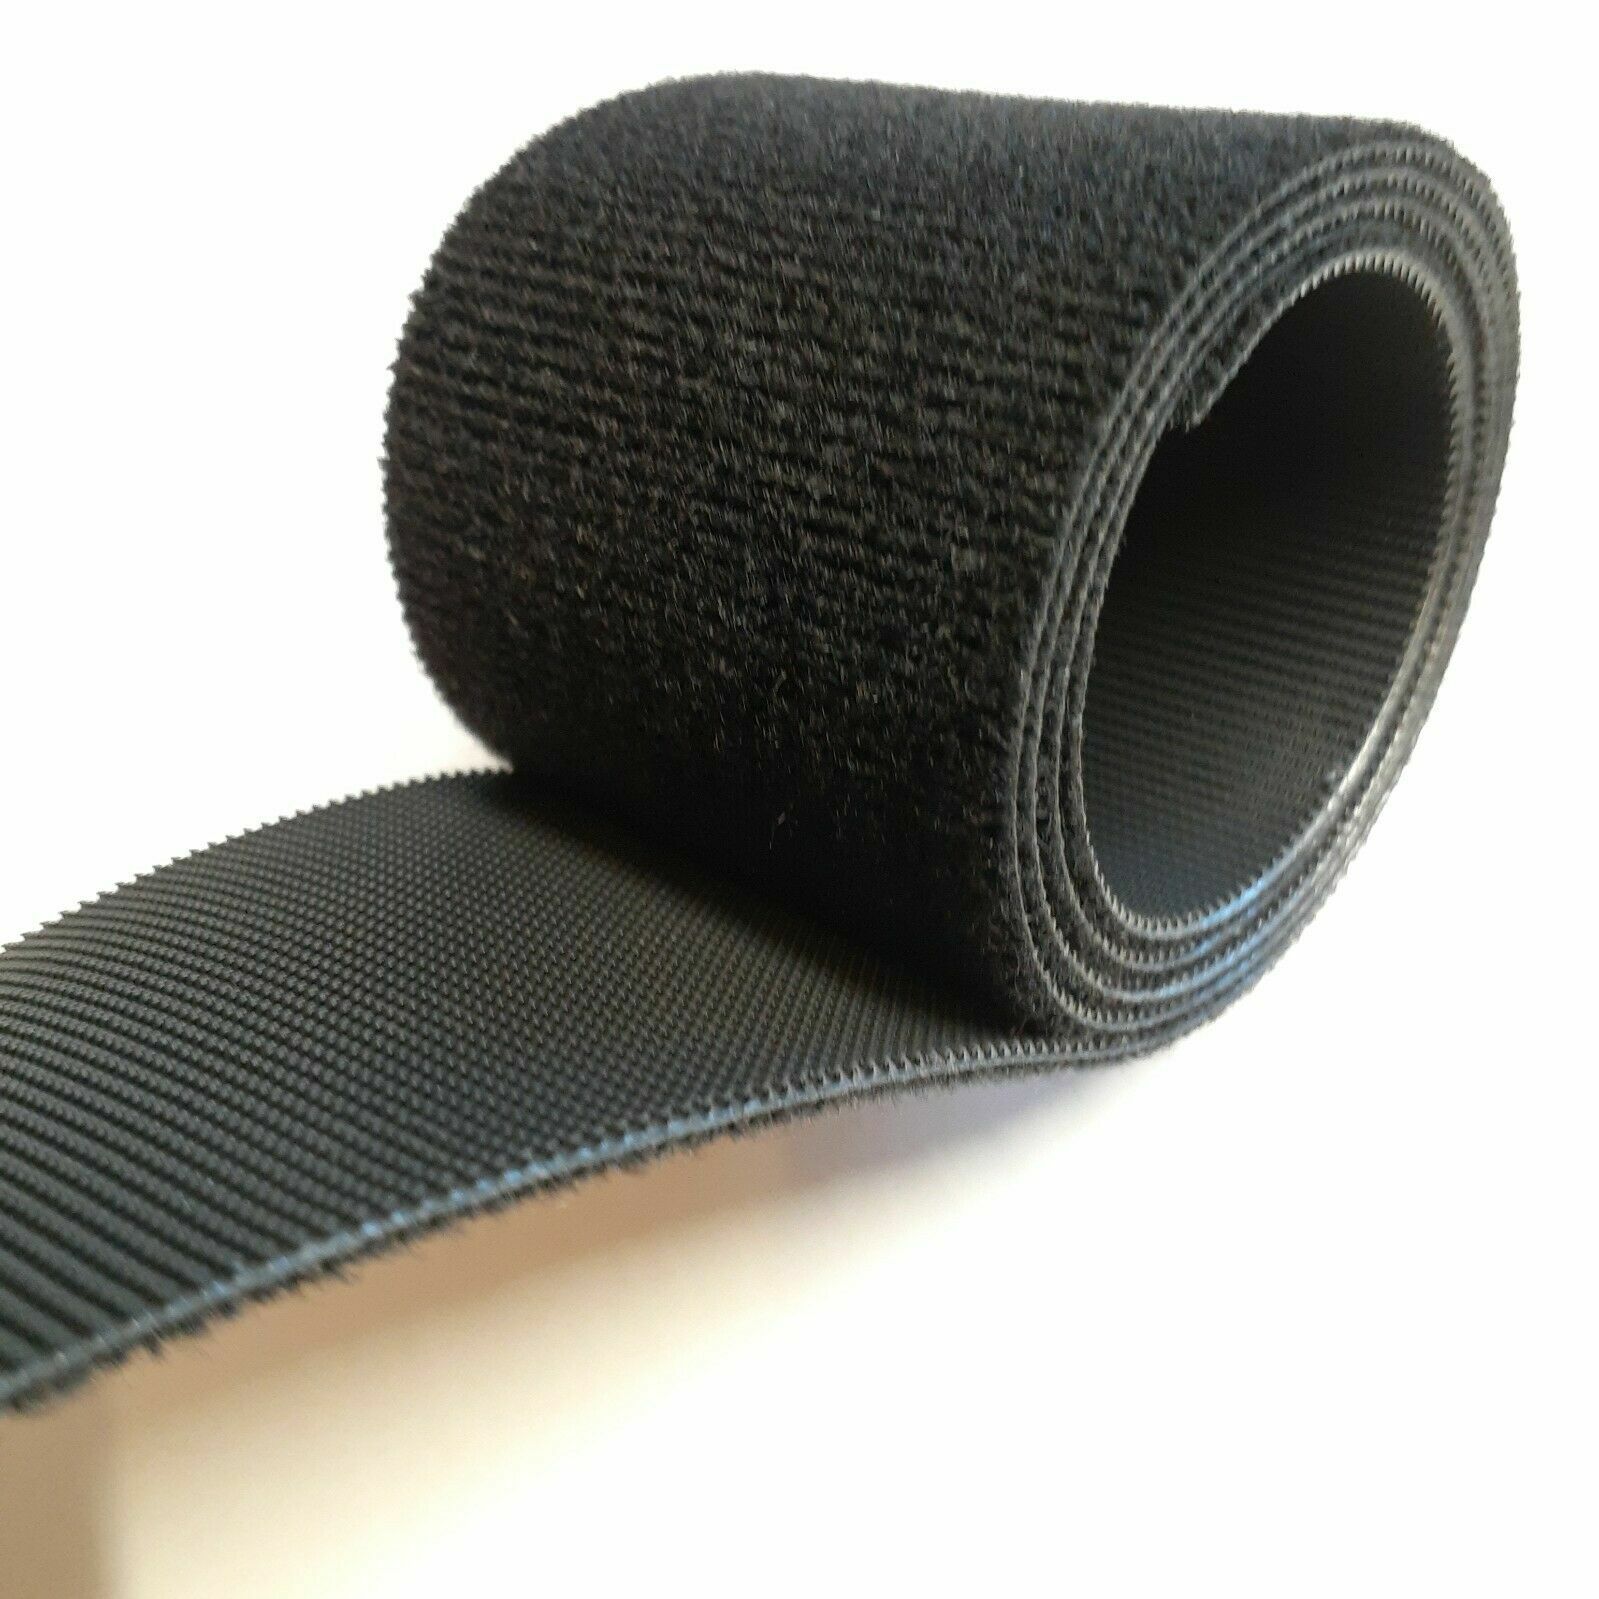 VELCRO® Brand Reusable OneWrap® Strap Double Sided 2